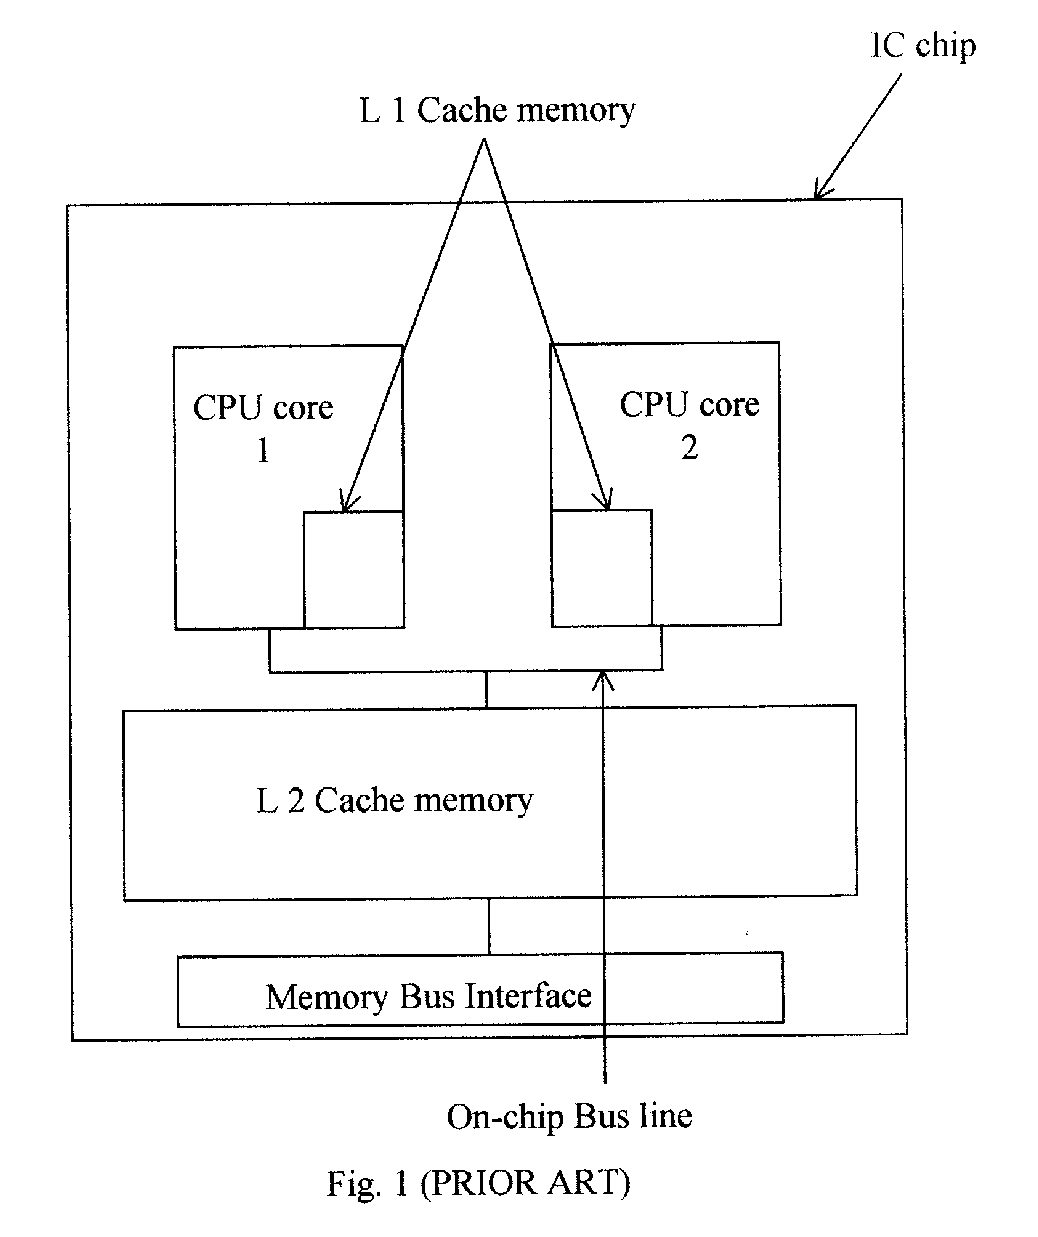 Chip layout for multiple CPU core microprocessor